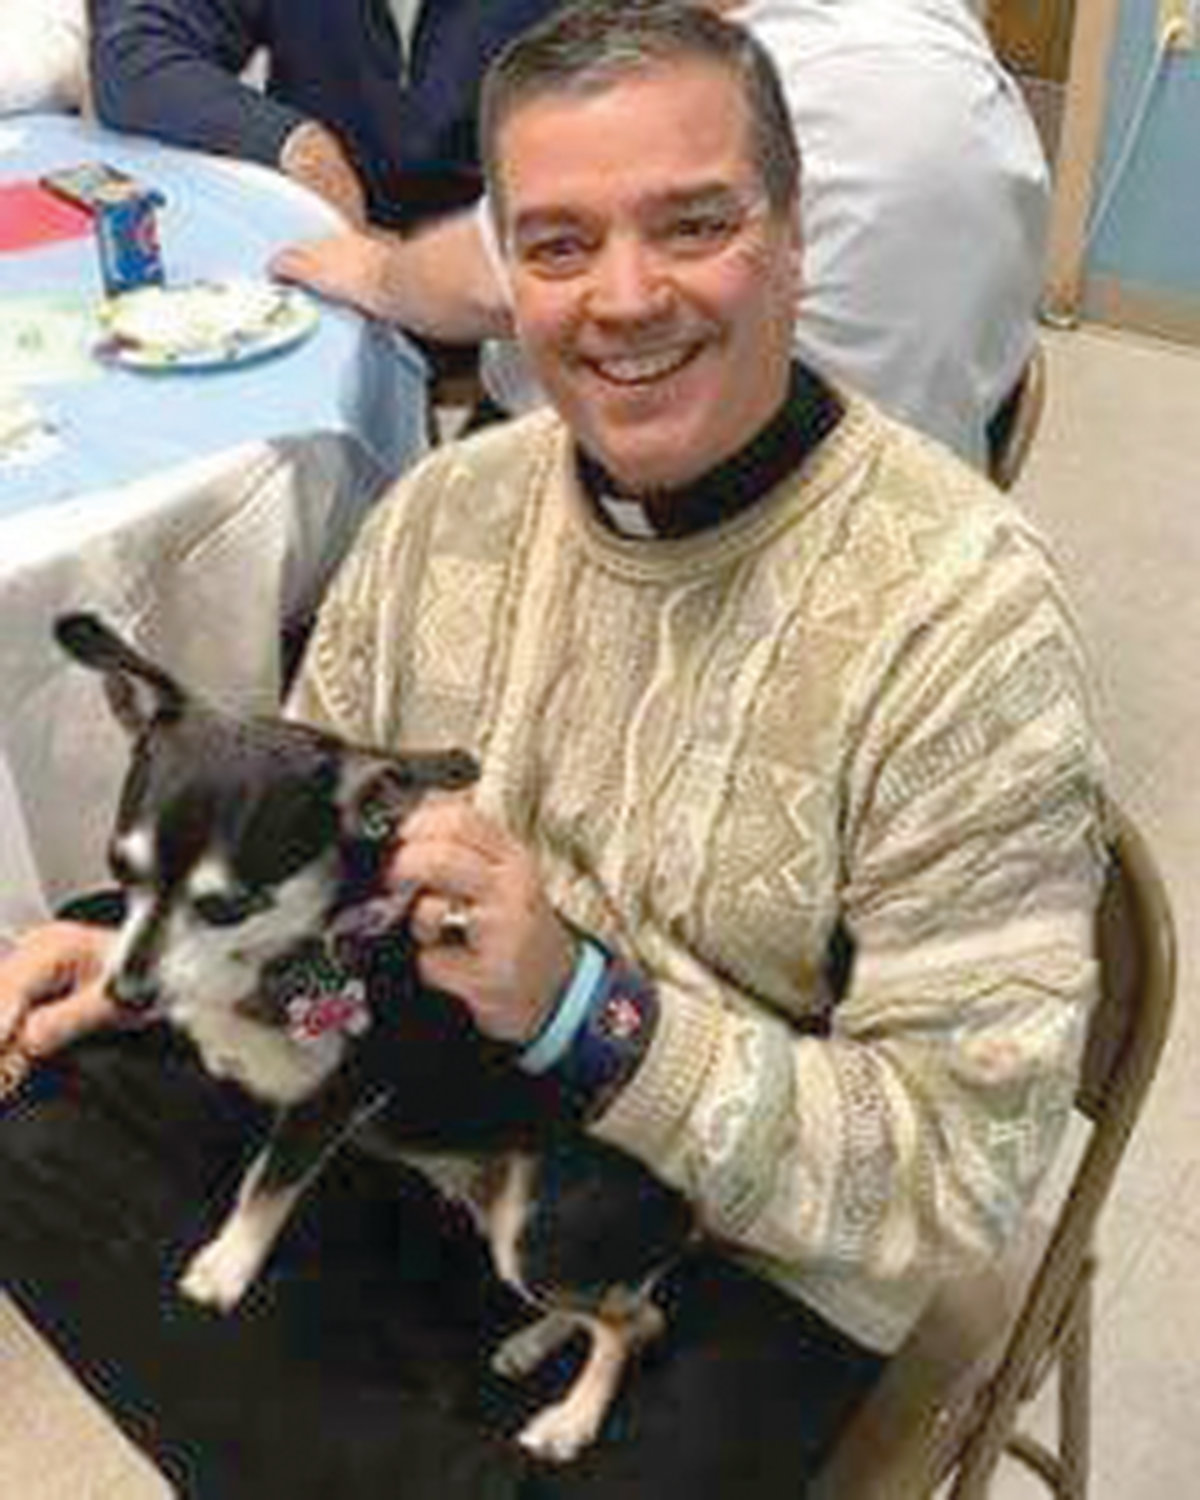 Father John Soares, the pastor at St. Thomas Church in Providence, smiles with his dog Dusty Rose. Father Soares has served St. Thomas Church and it’s school community for the past 11 years.